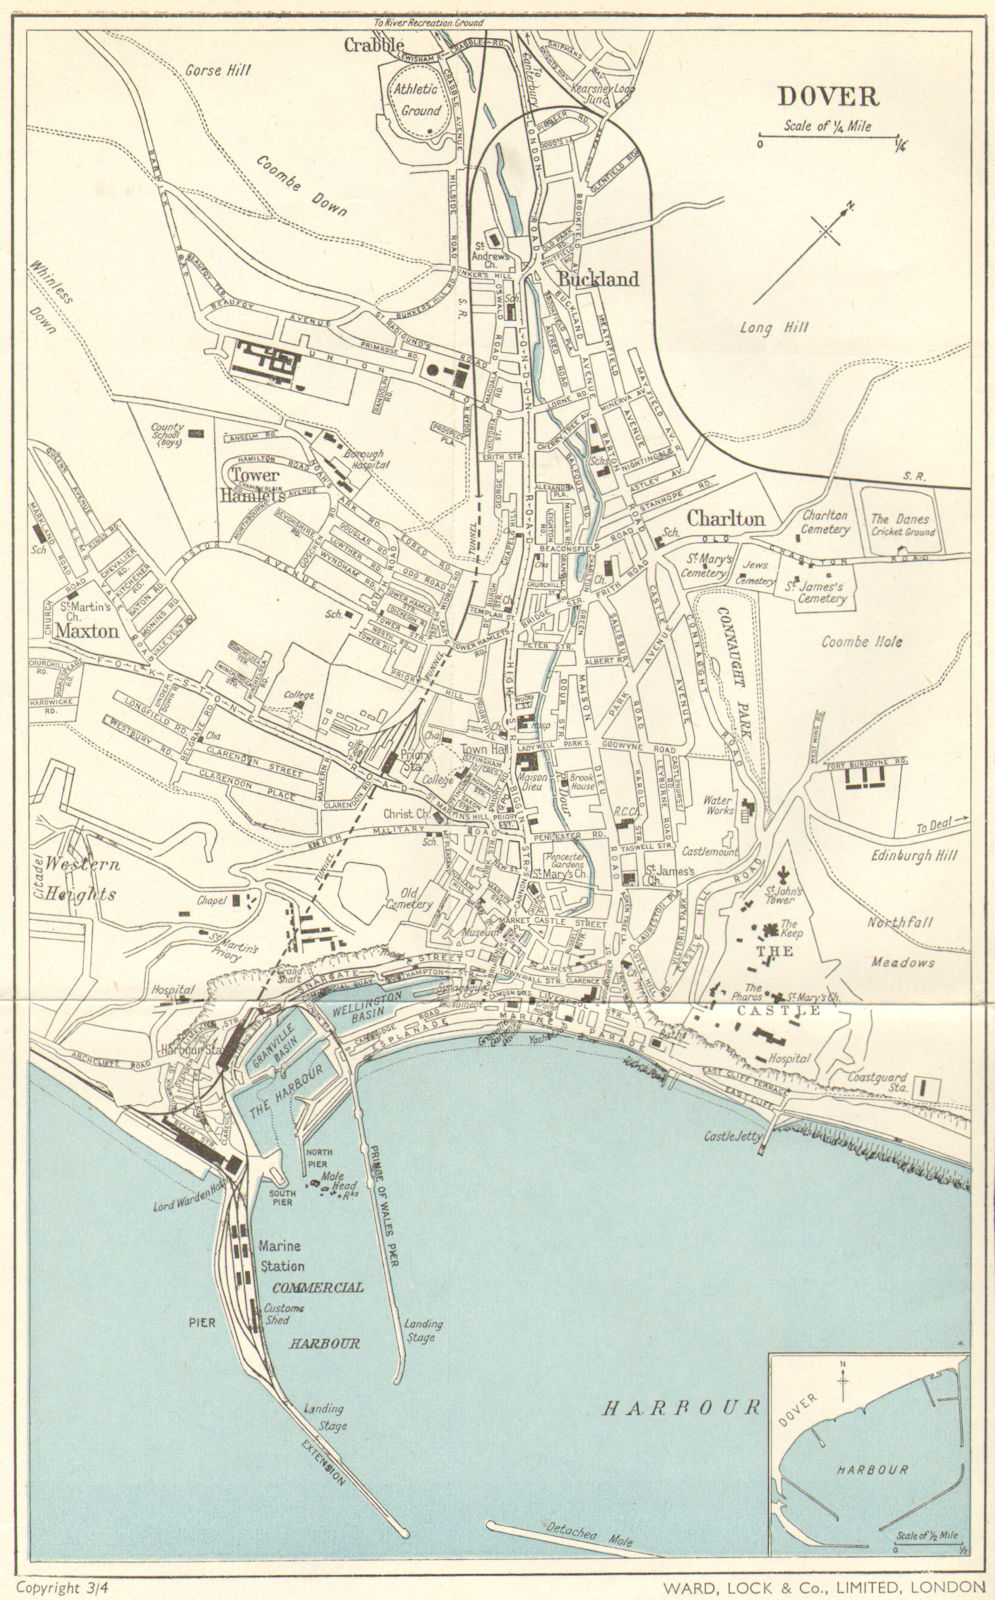 DOVER vintage town/city plan. WARD LOCK c1960 old vintage map chart